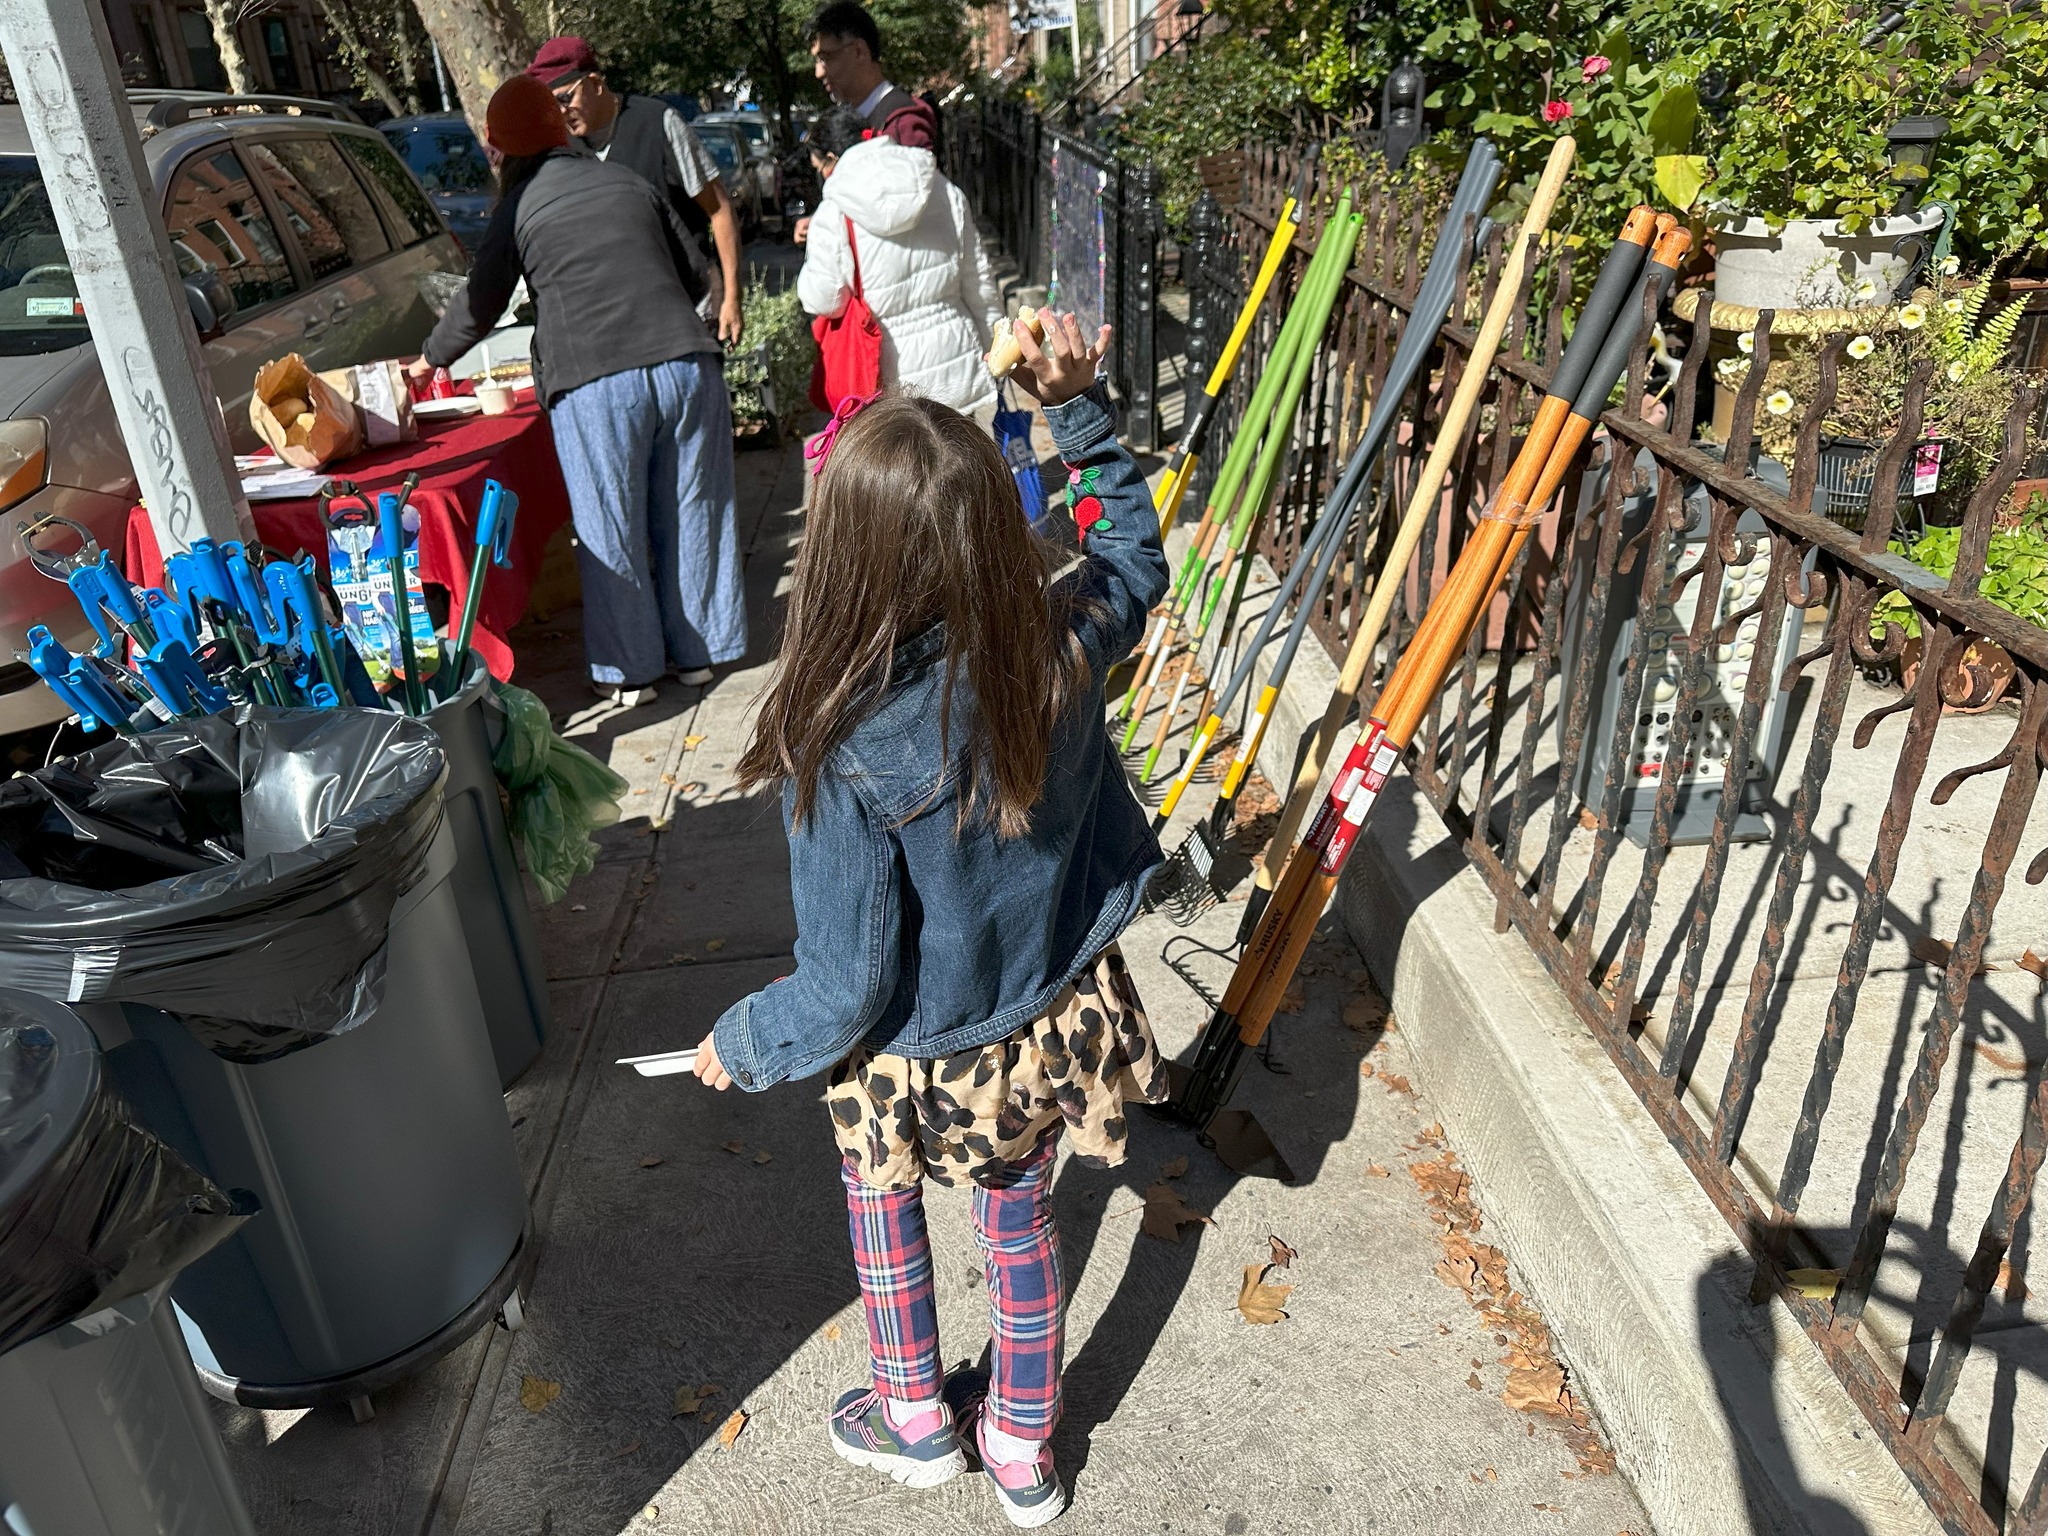 A young girl in a denim jacket and patterned leggings stands on a sidewalk, looking at a rack of colorful brooms for sale at a street market.